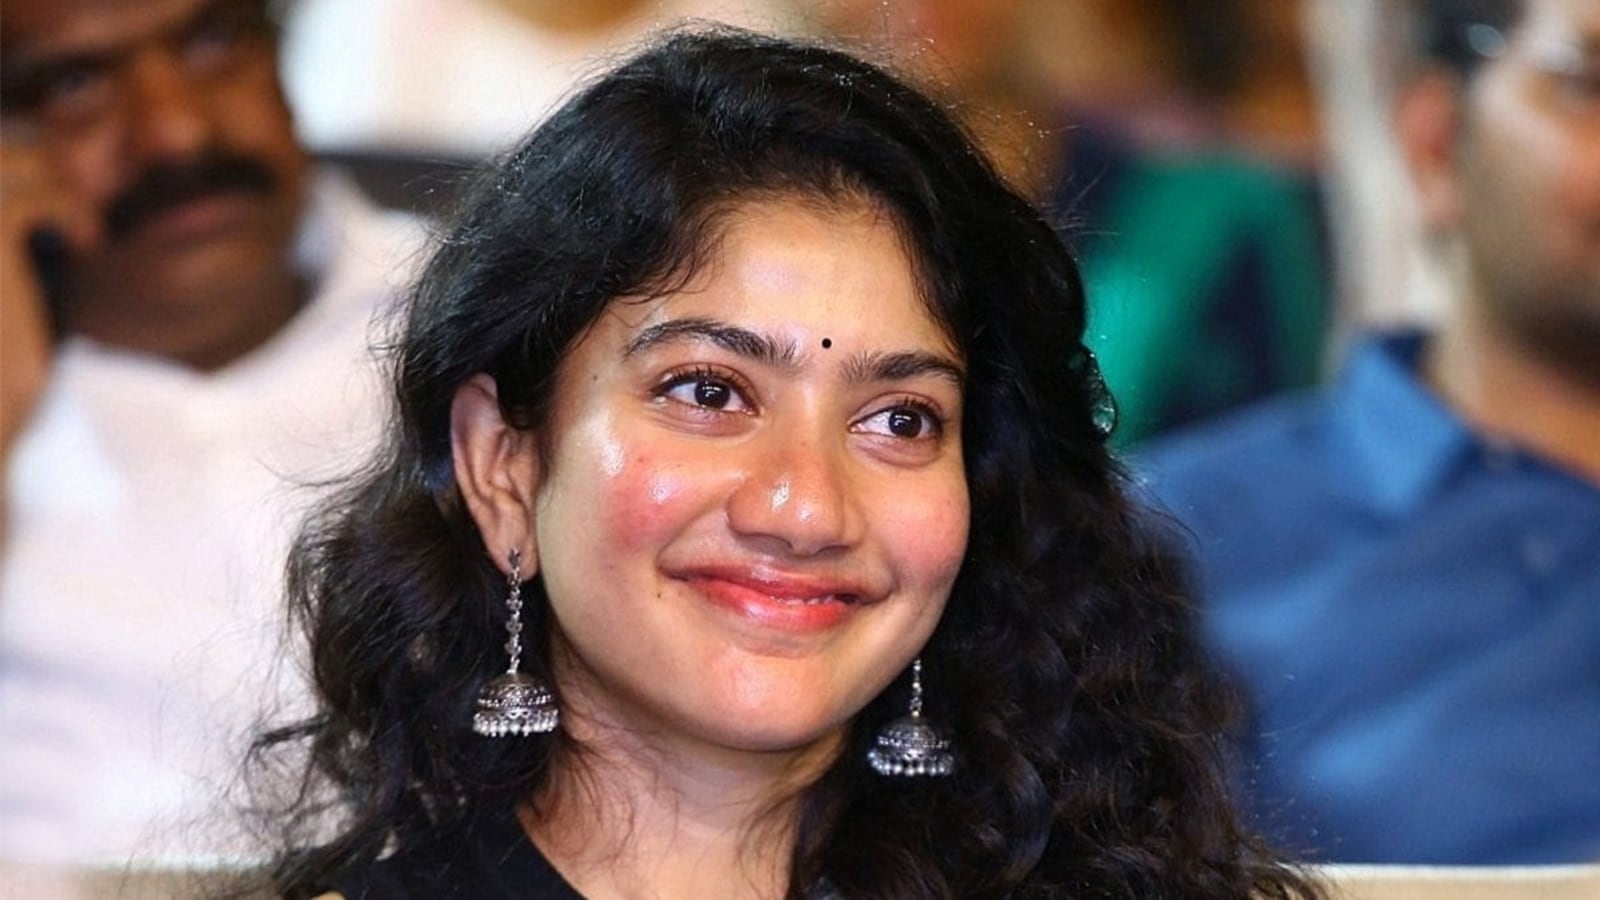 Should not hurt on religious lines: Actor Sai Pallavi on Pandits ...